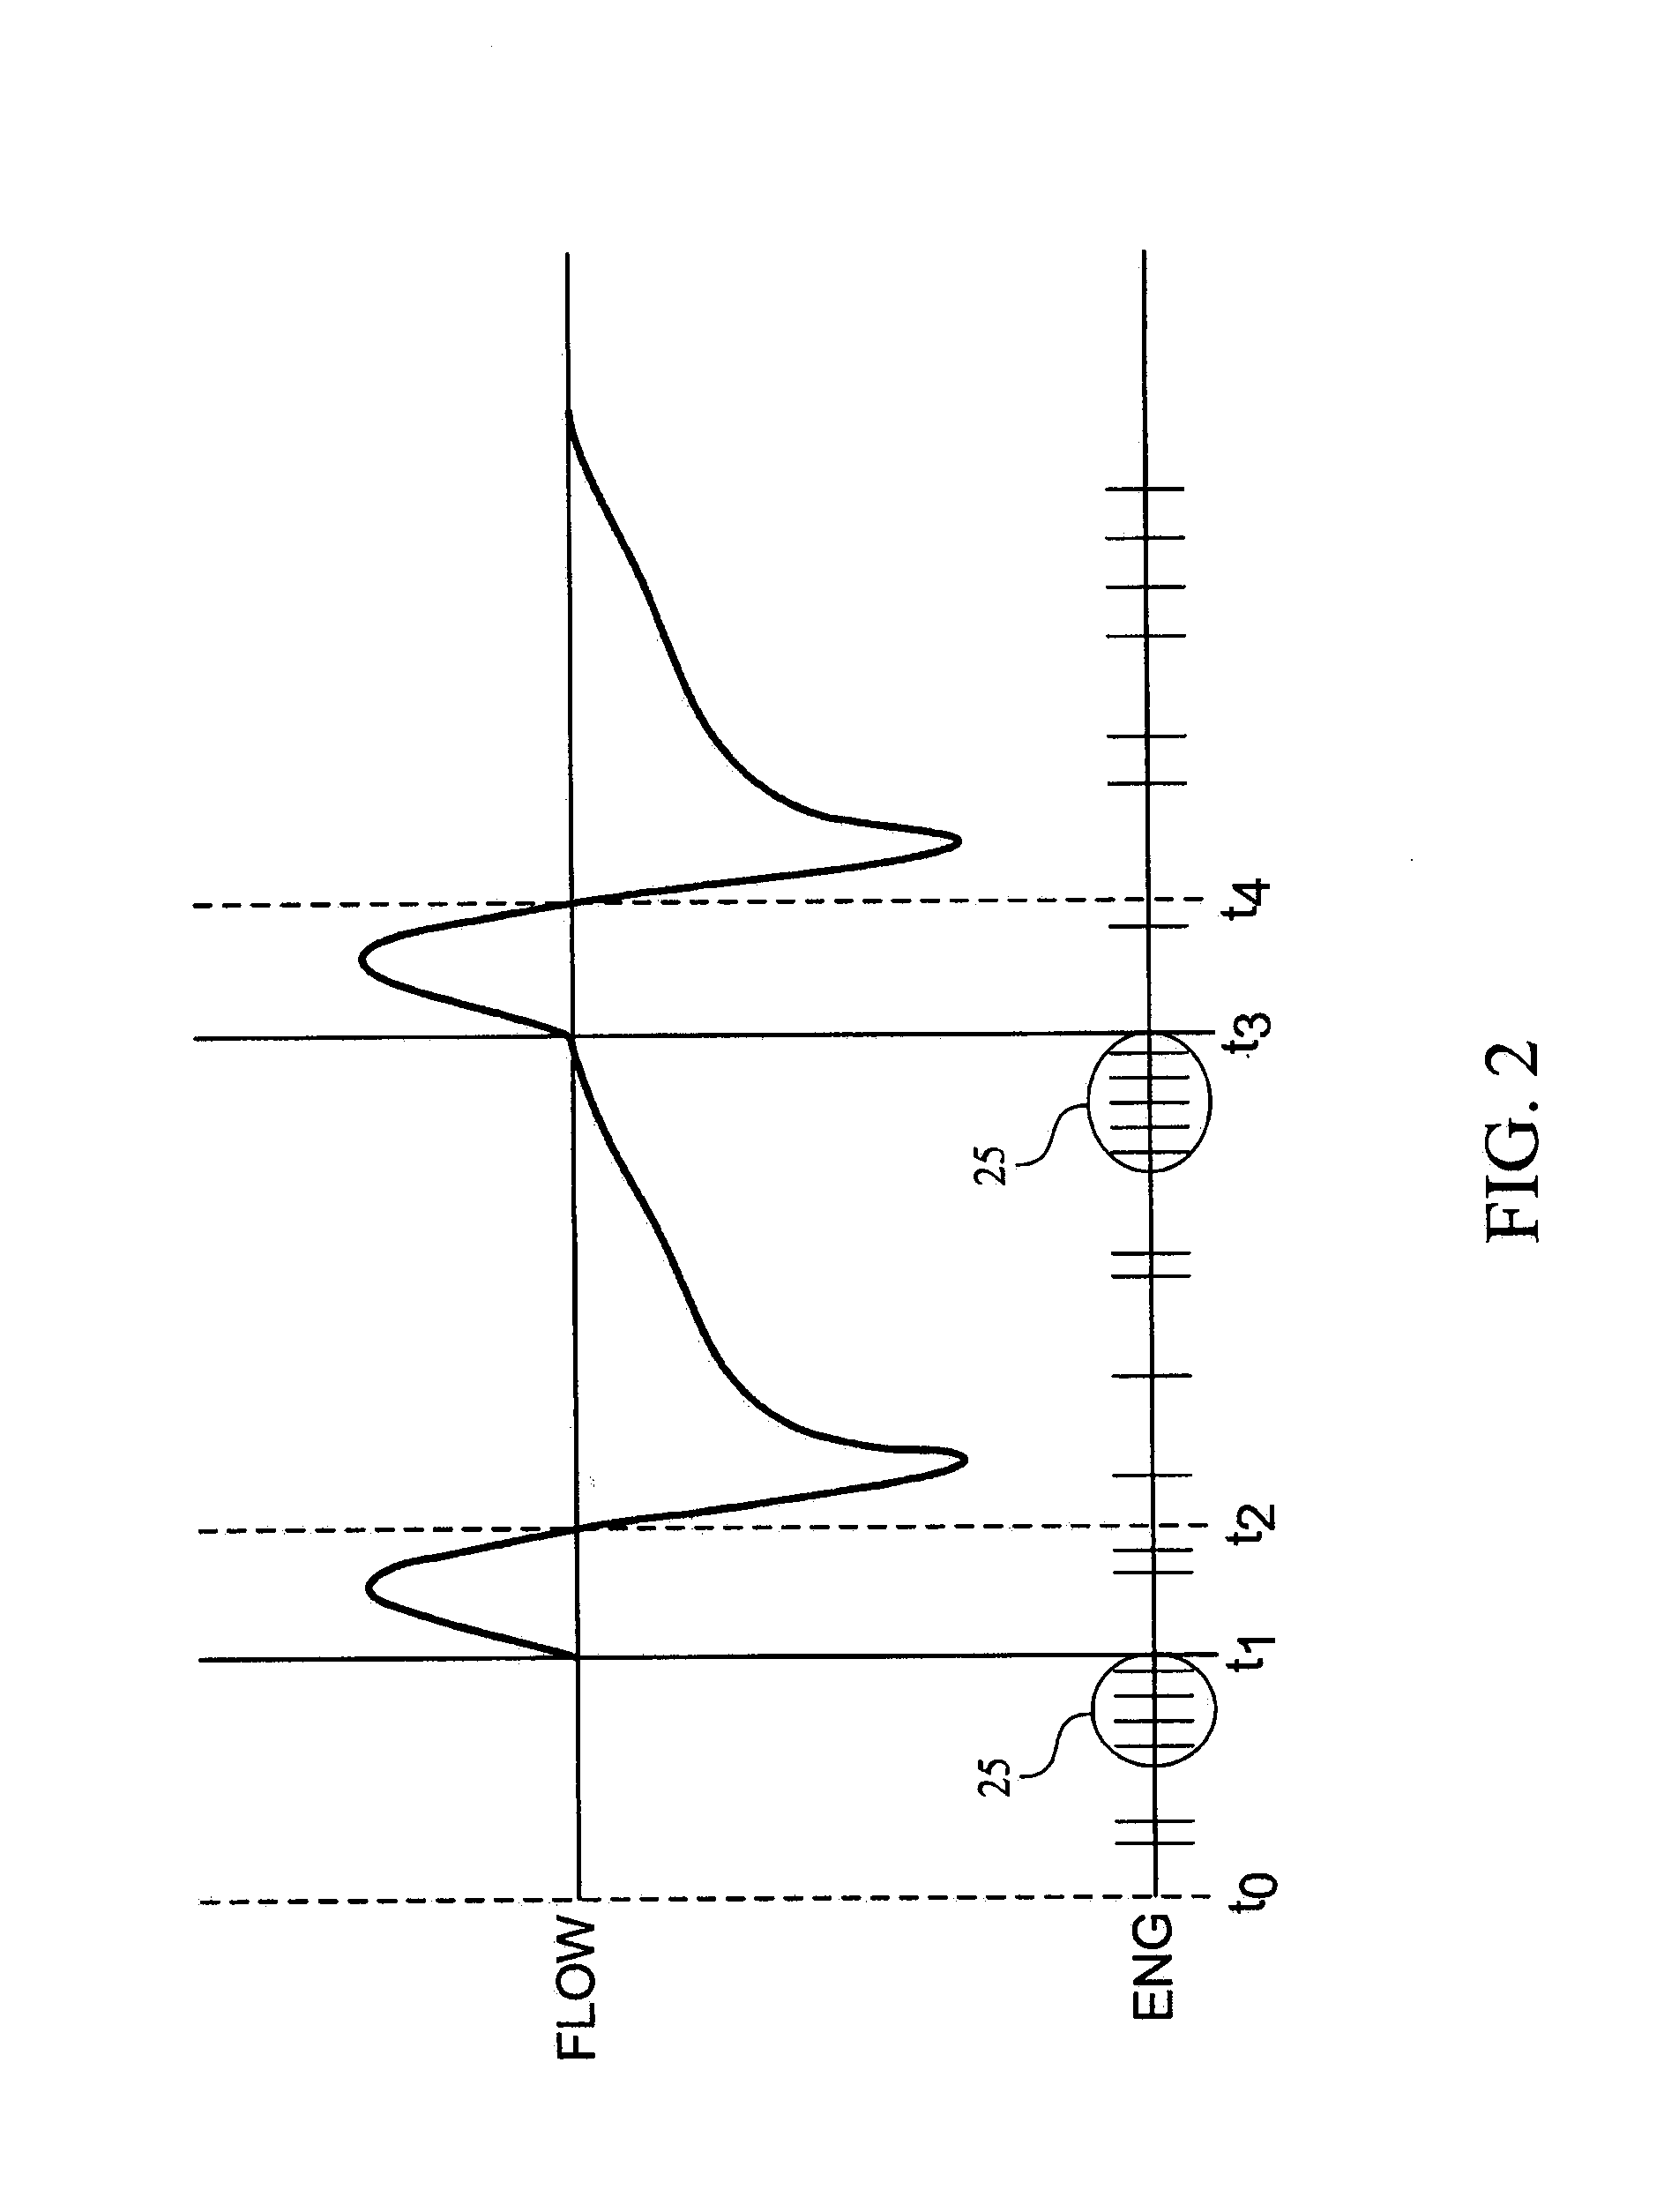 Method and Apparatus for Hypoglossal Nerve Stimulation